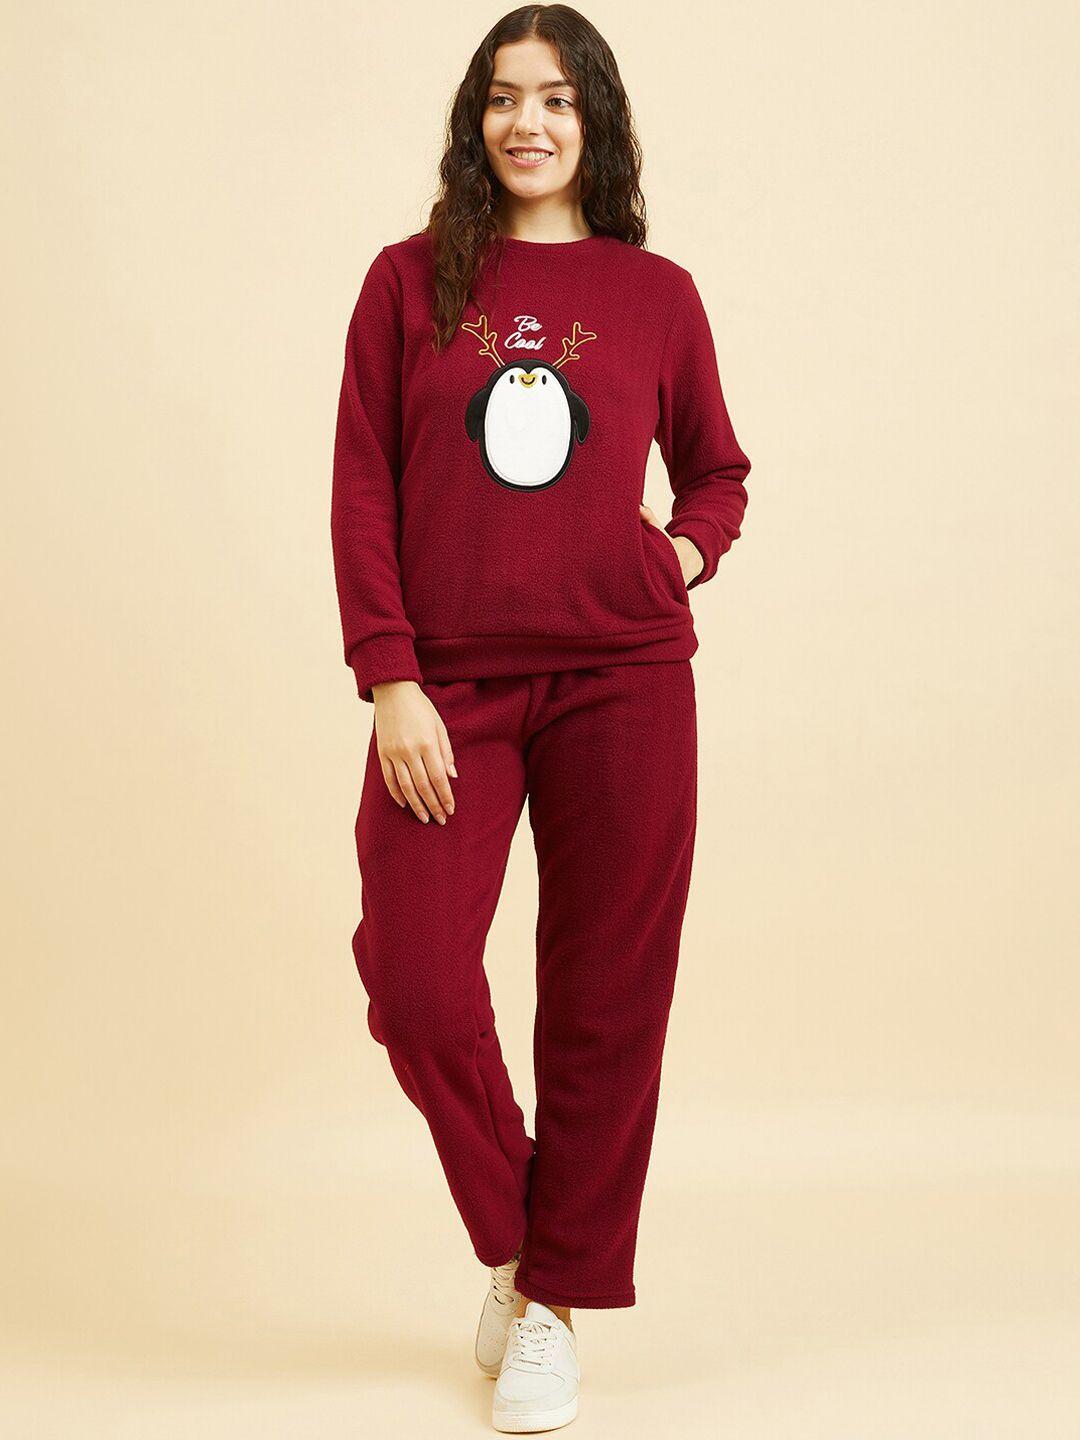 sweet dreams graphic embroidered fleece sweatshirt with trouser